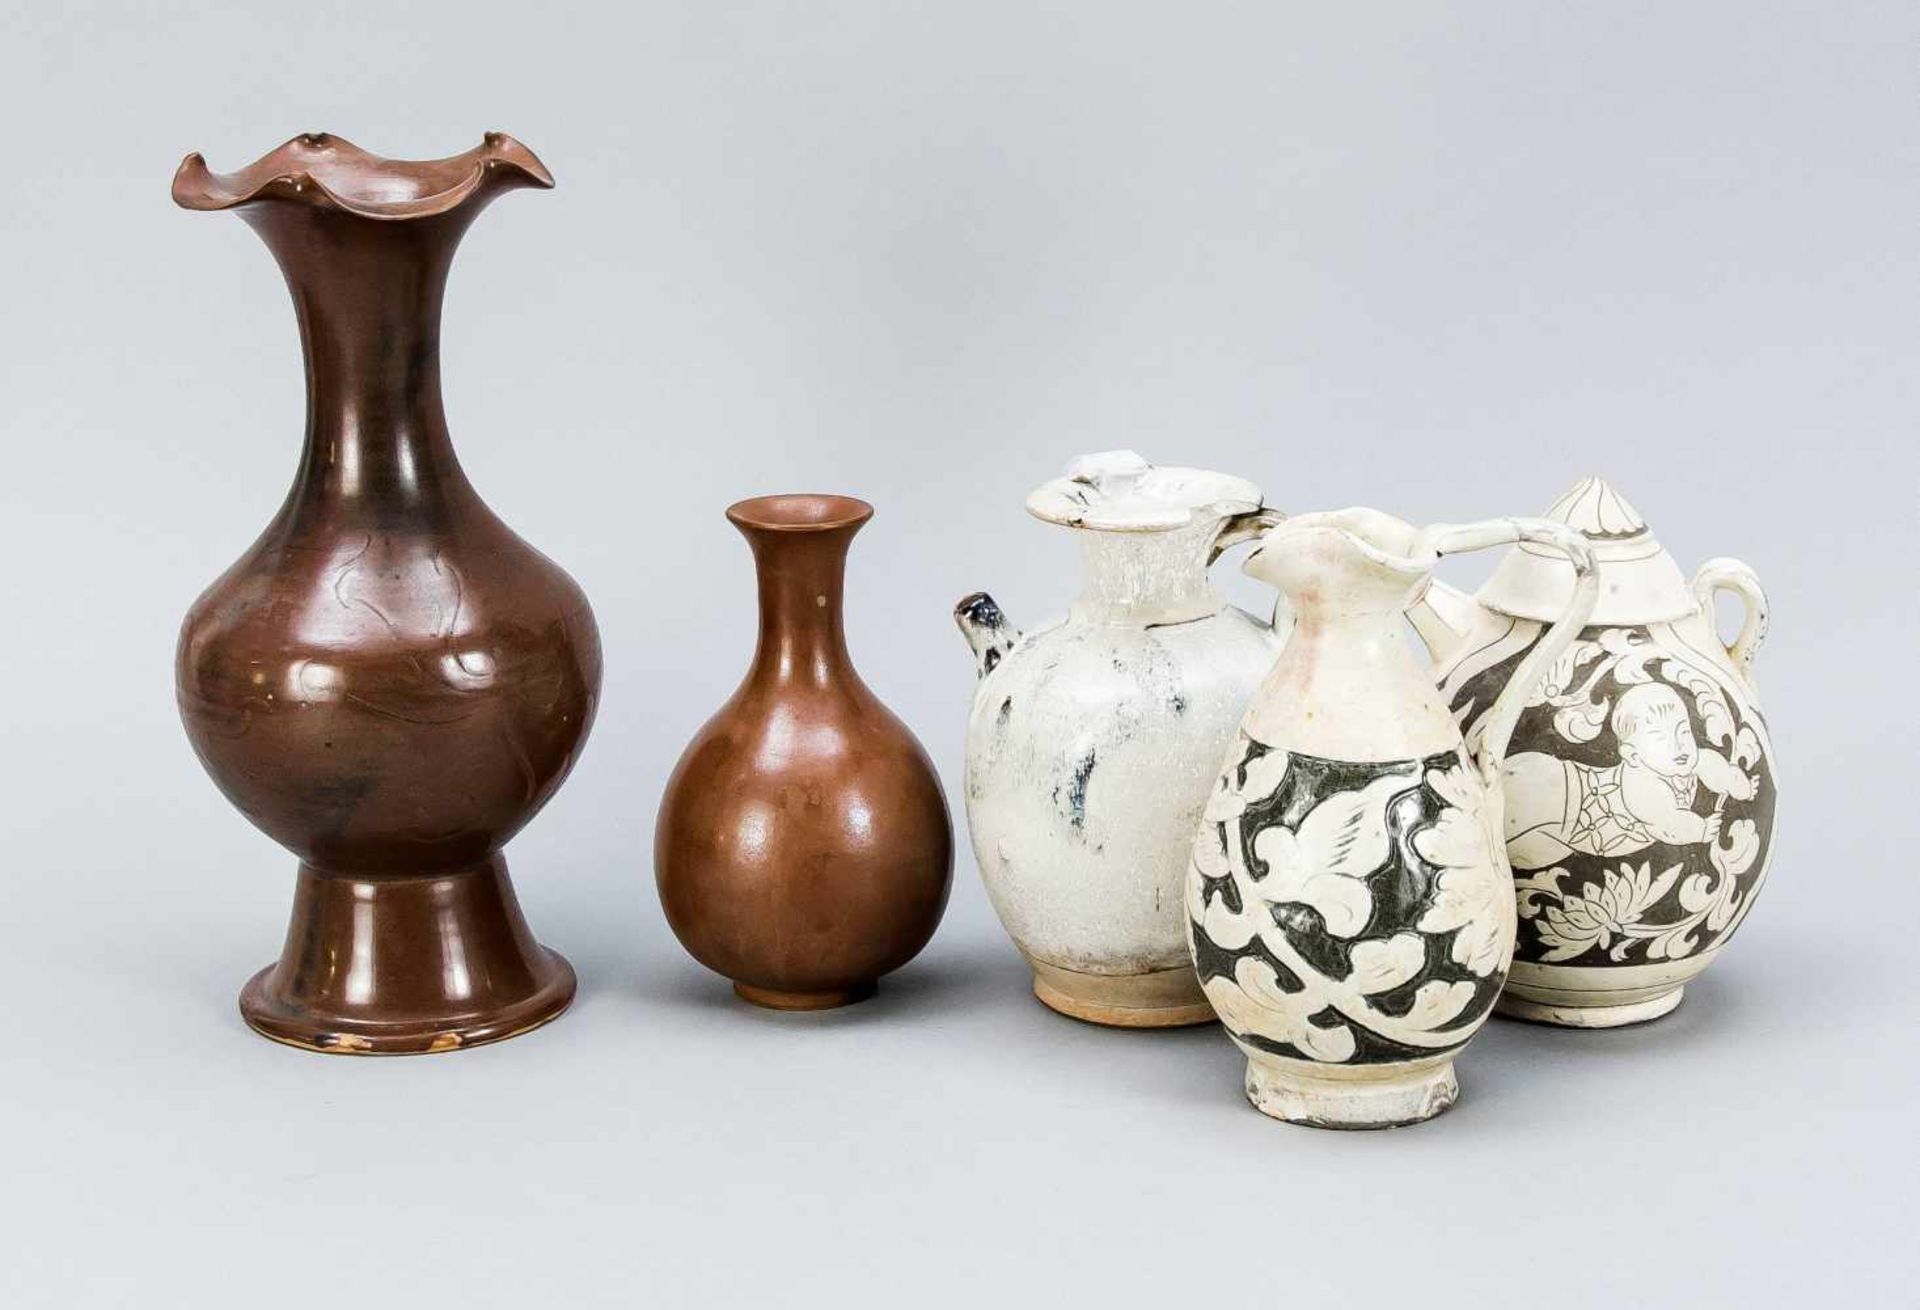 5 parts ceramics, China, 20th century. Jugs and vases in the style of old, classic epochs.